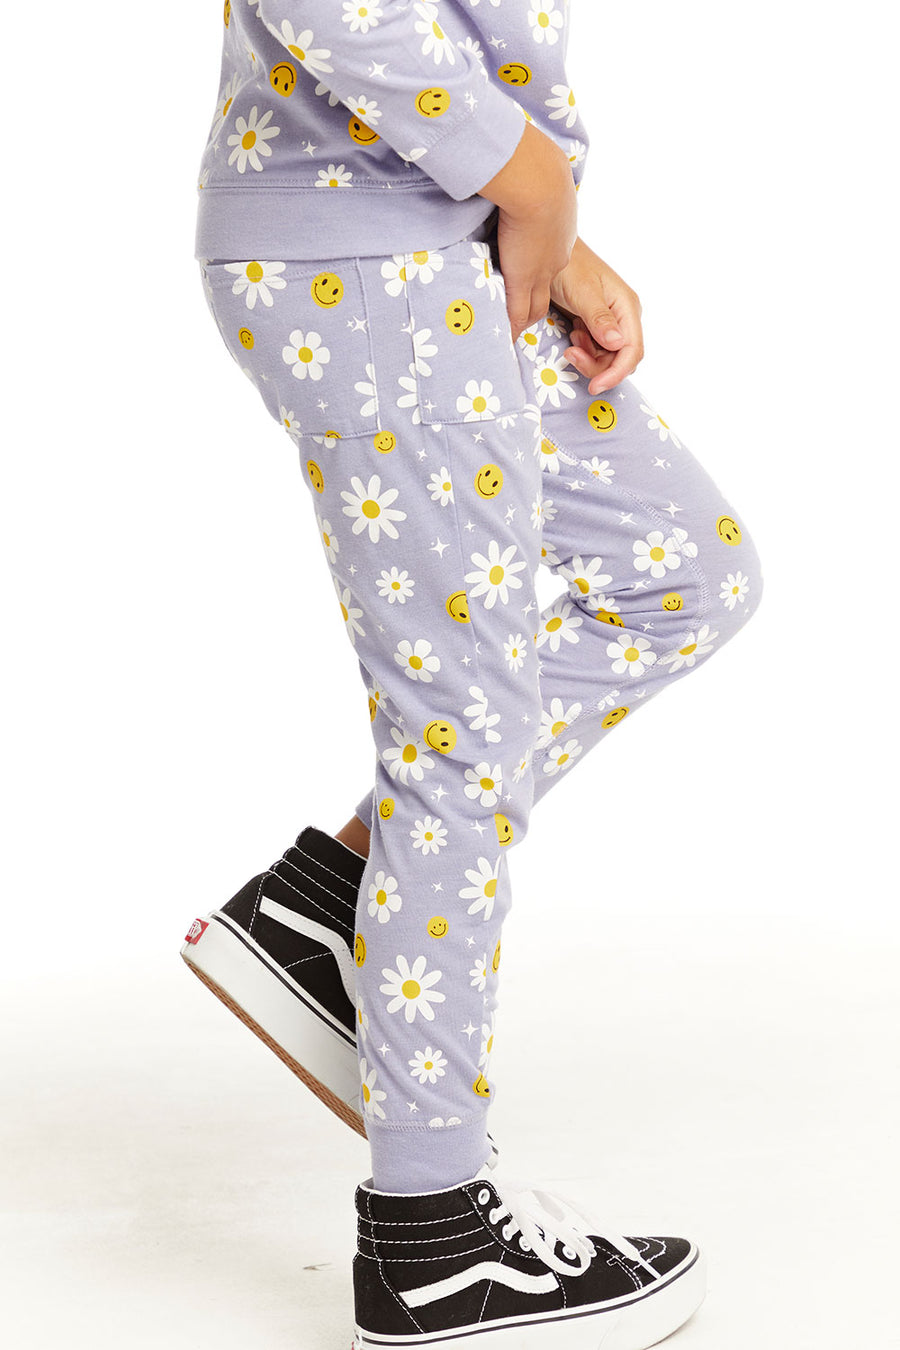 Smiley Daisies Slim Joggers GIRLS chaserbrand